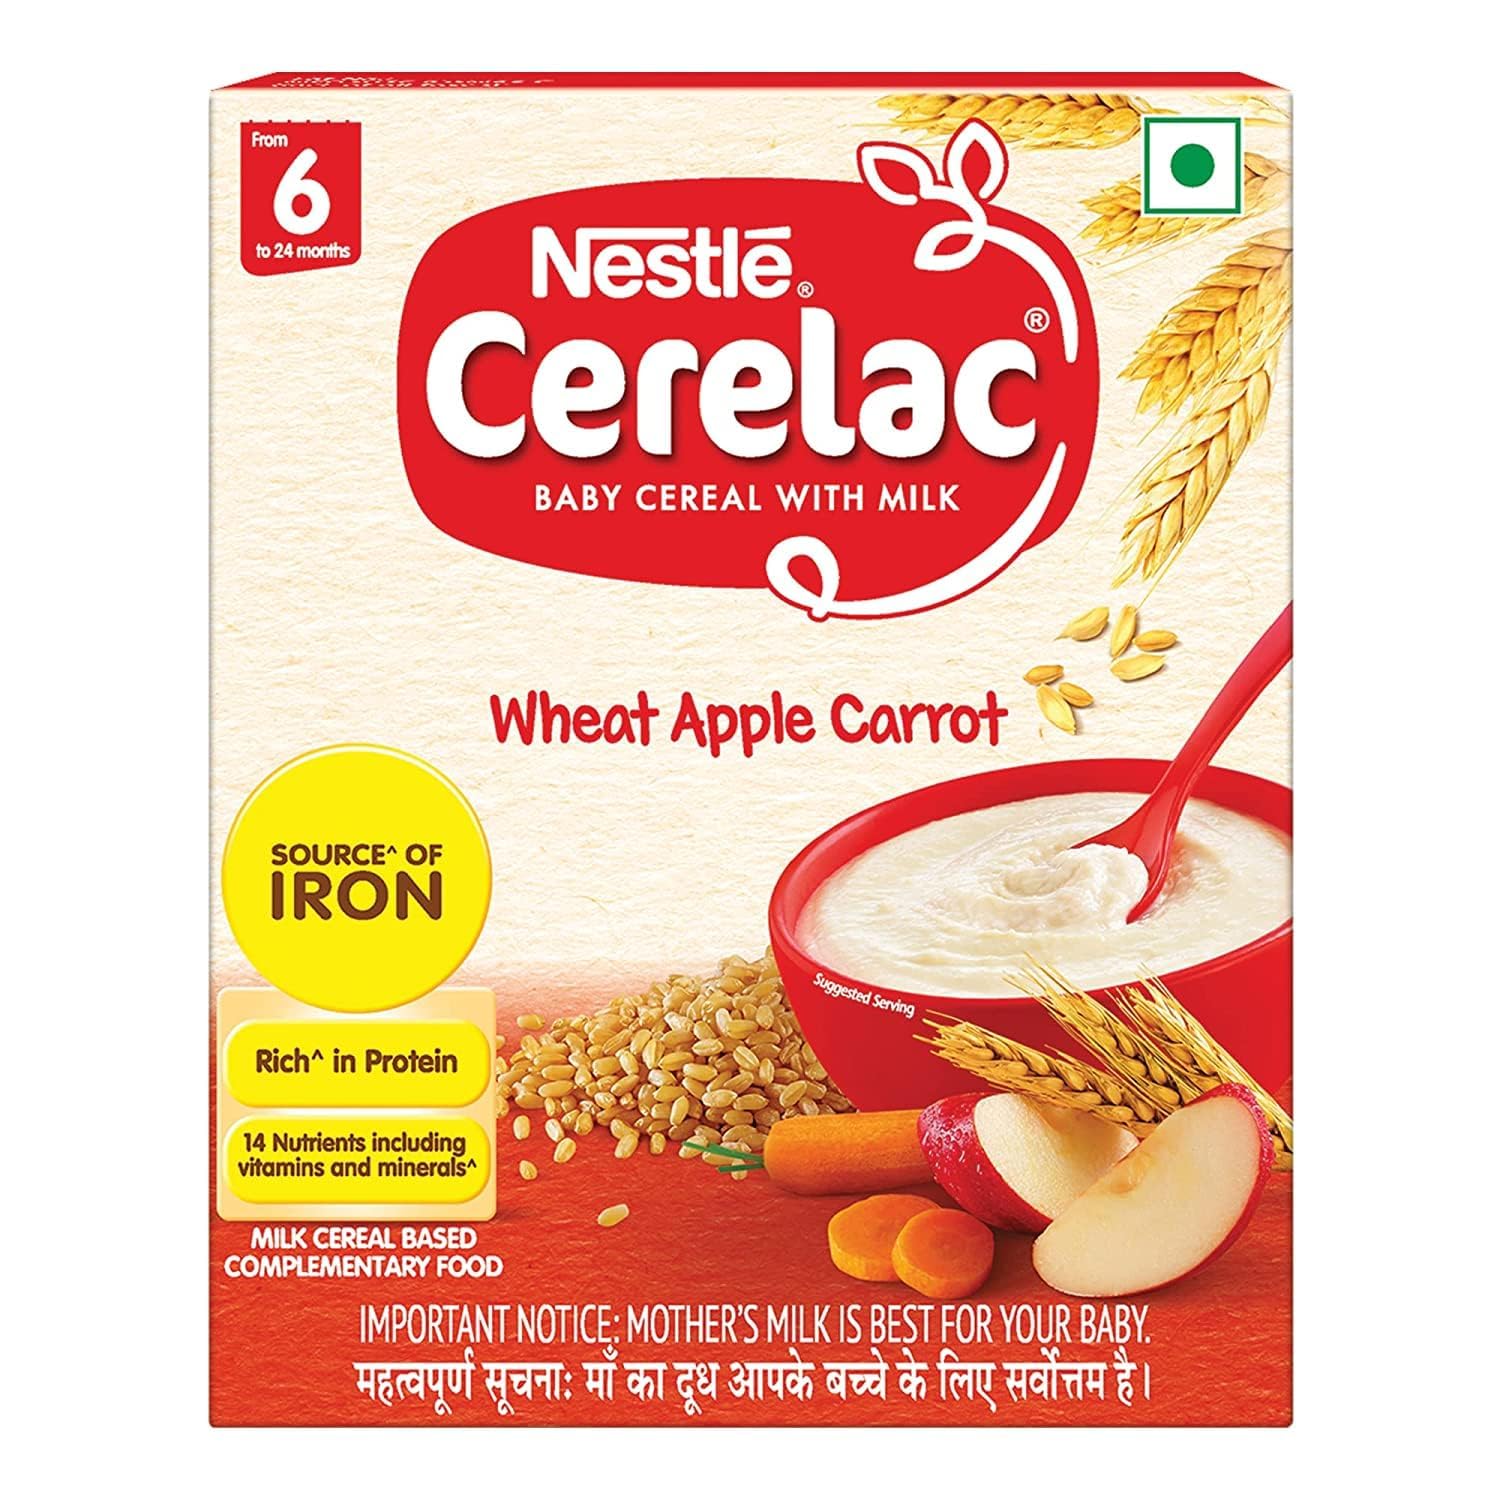 Nestle Cerelac Baby Cereal with Milk & Iron (from 6 to 24 Months) | Wheat Apple Carrot